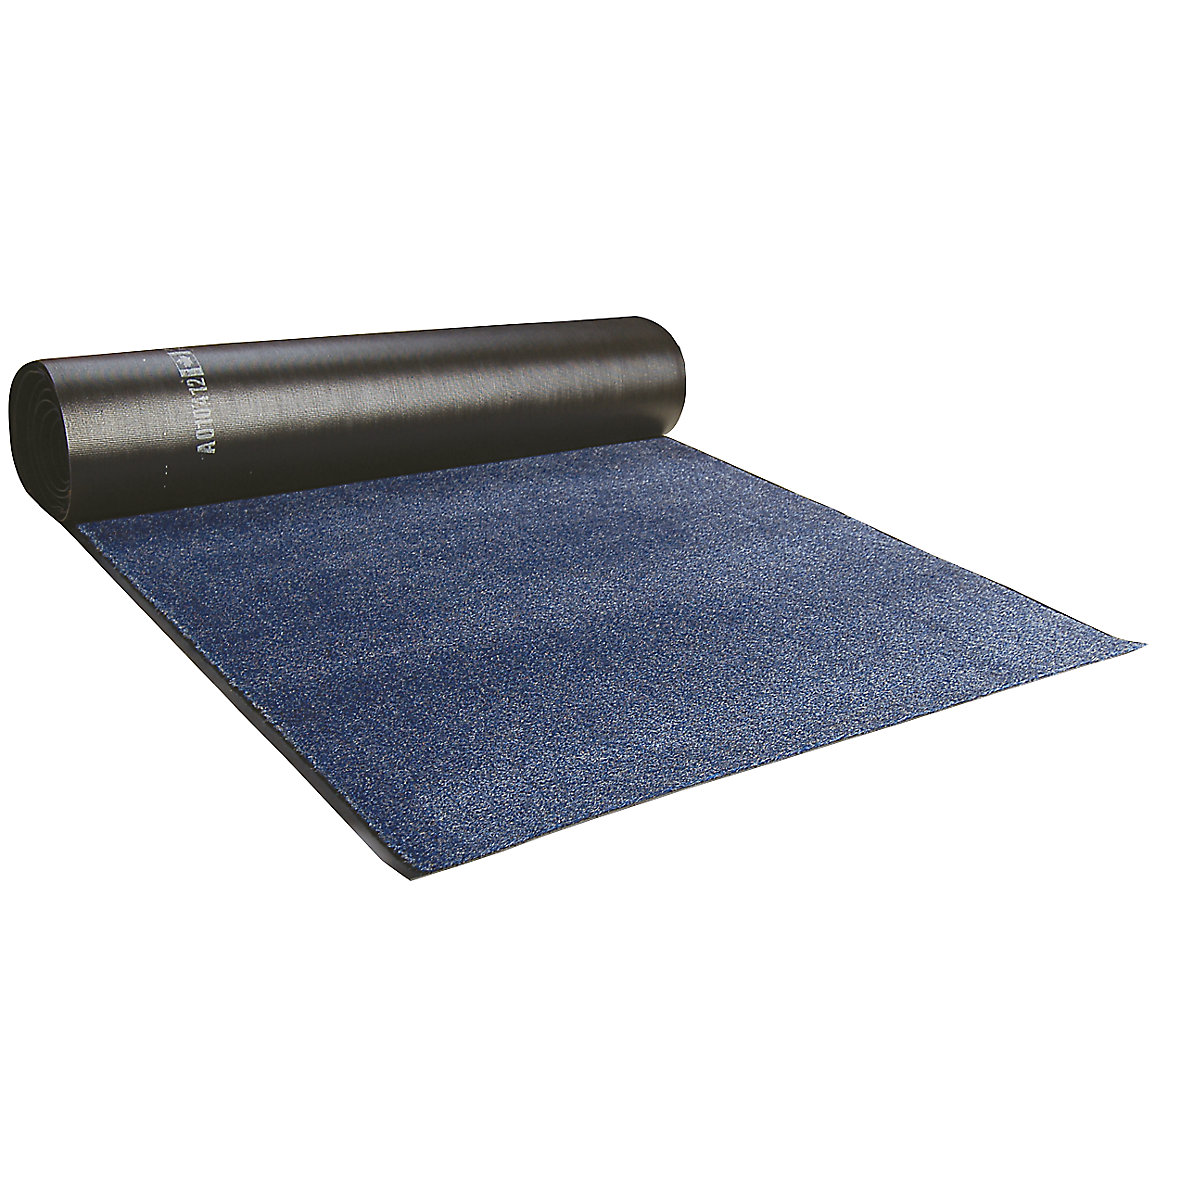 EAZYCARE AQUA entrance matting, width 1200 mm, sold by the metre, blue